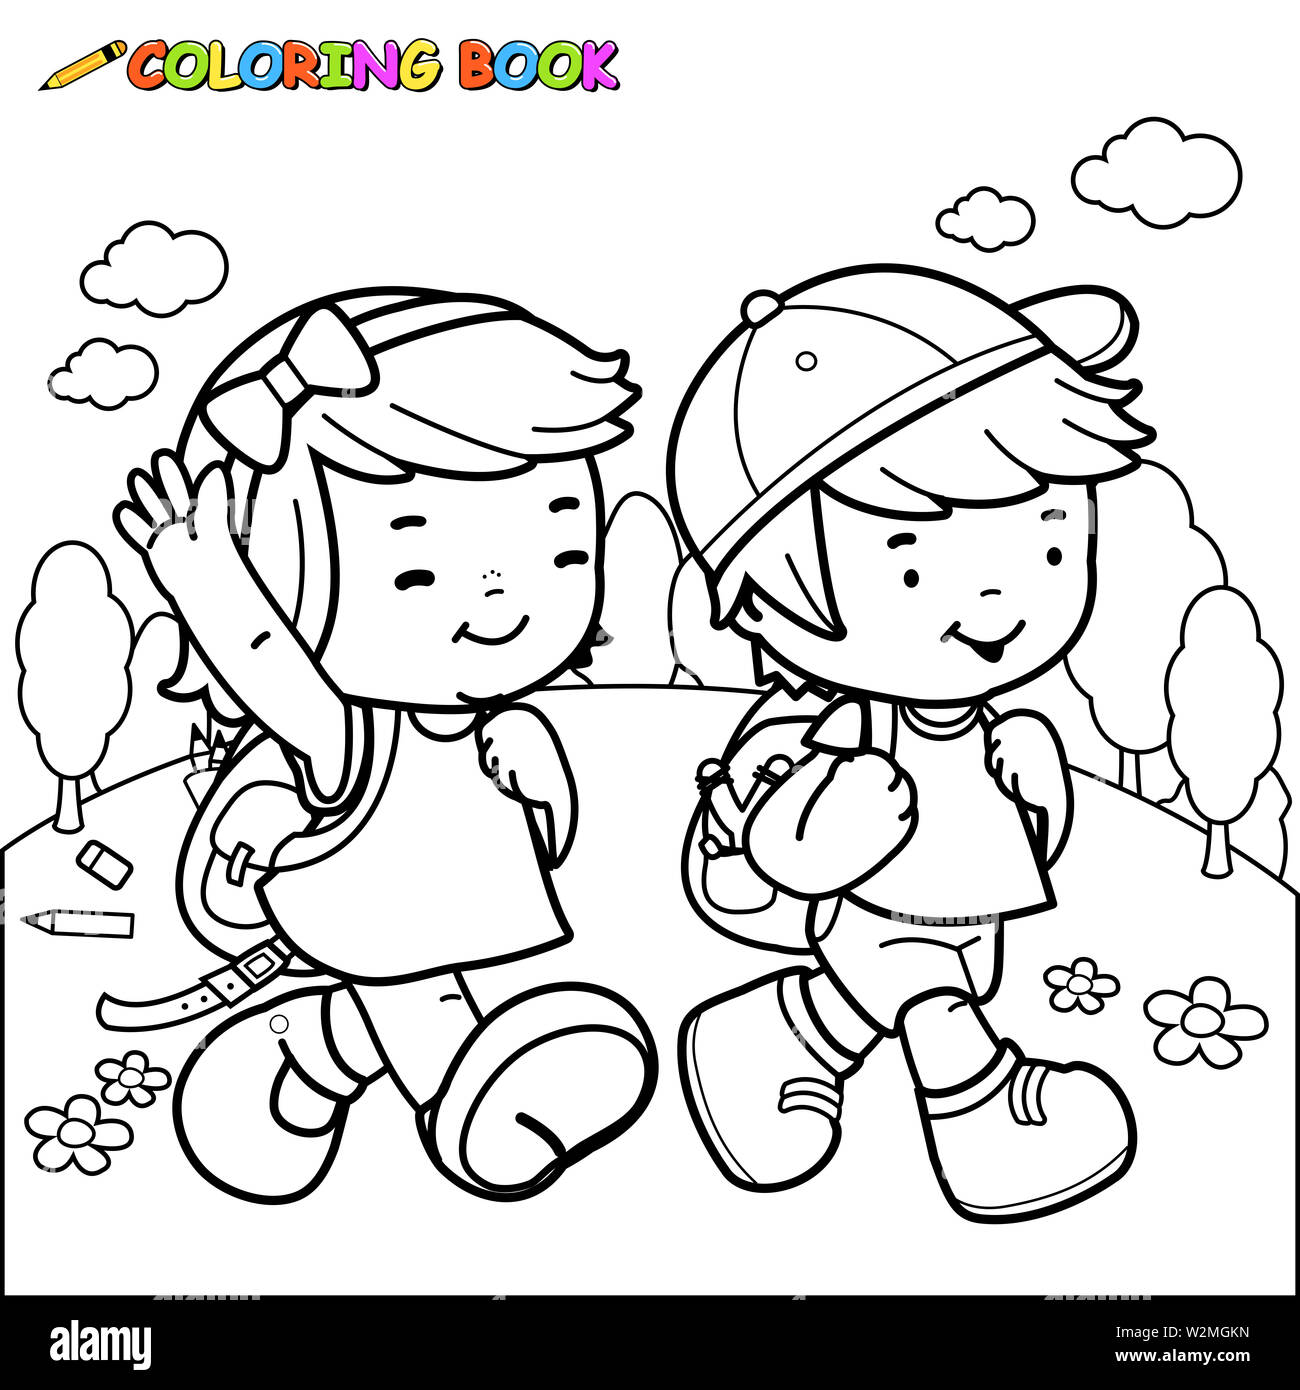 Illustration Of A Black And White Outline Image Of A Girl And A Boy Students Walking To School Coloring Book Page Stock Photo Alamy